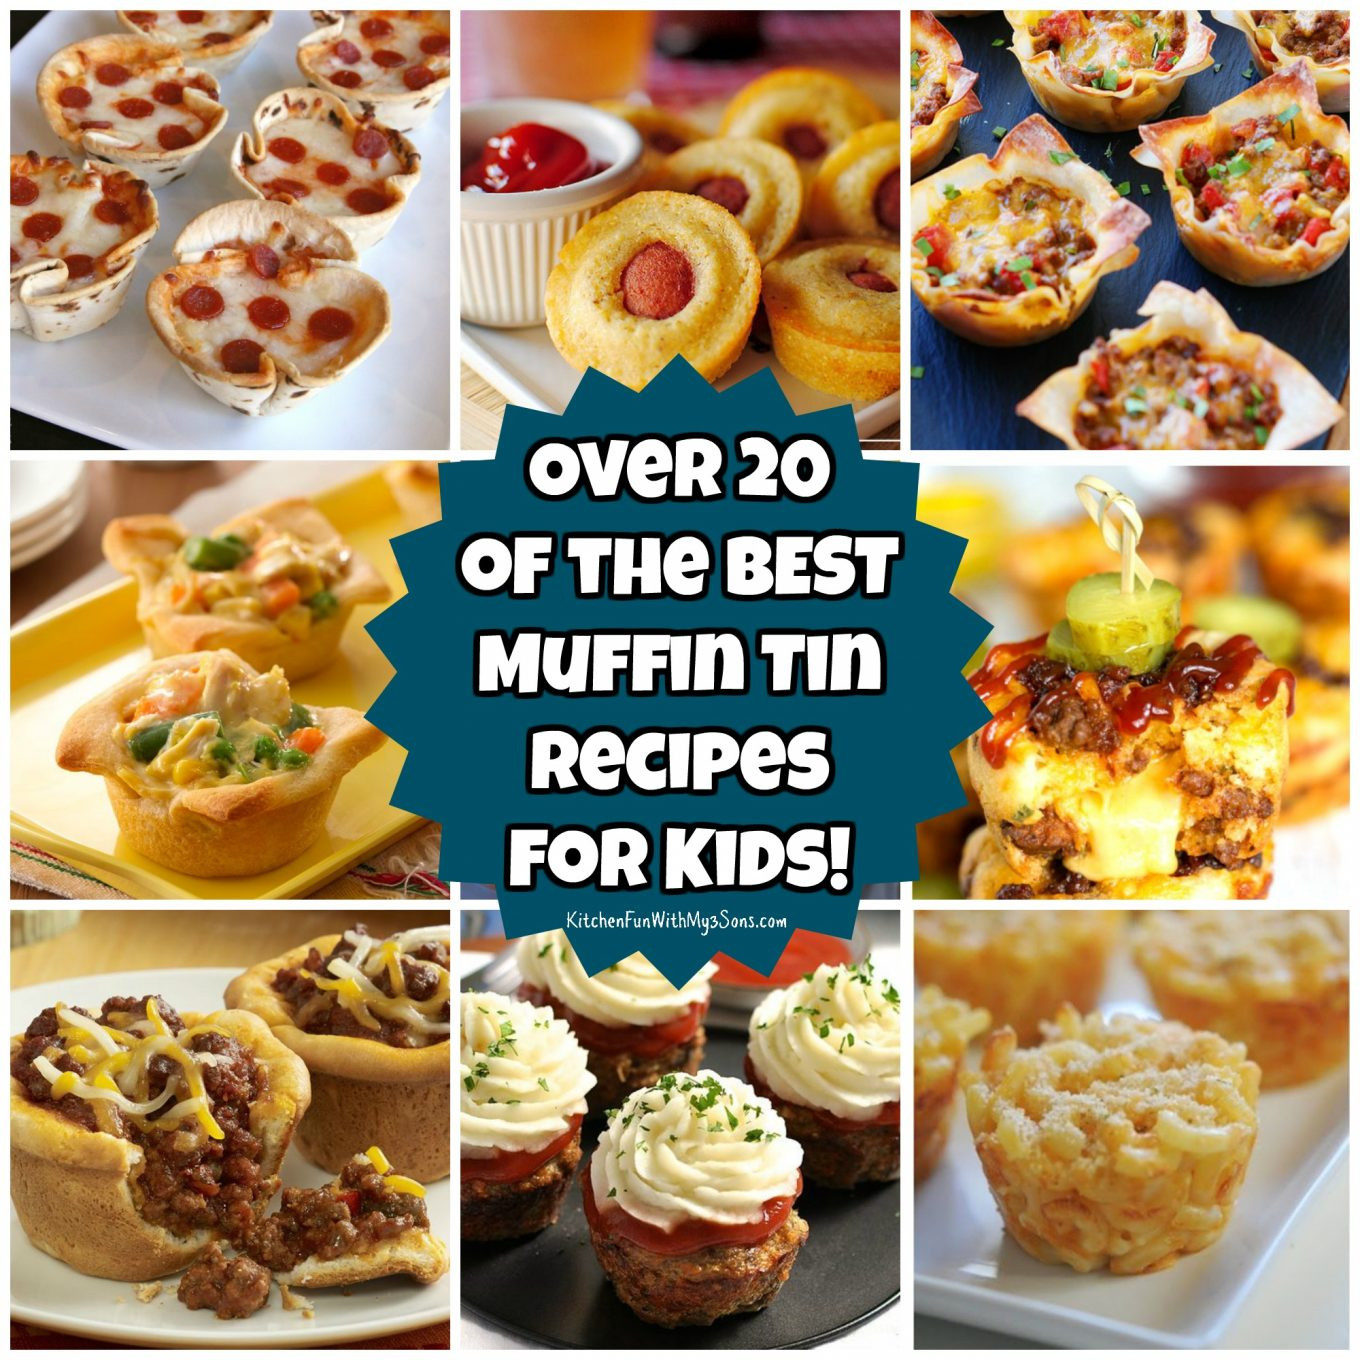 Kids Recipes
 20 Muffin Tin Recipes for Kids Kitchen Fun With My 3 Sons